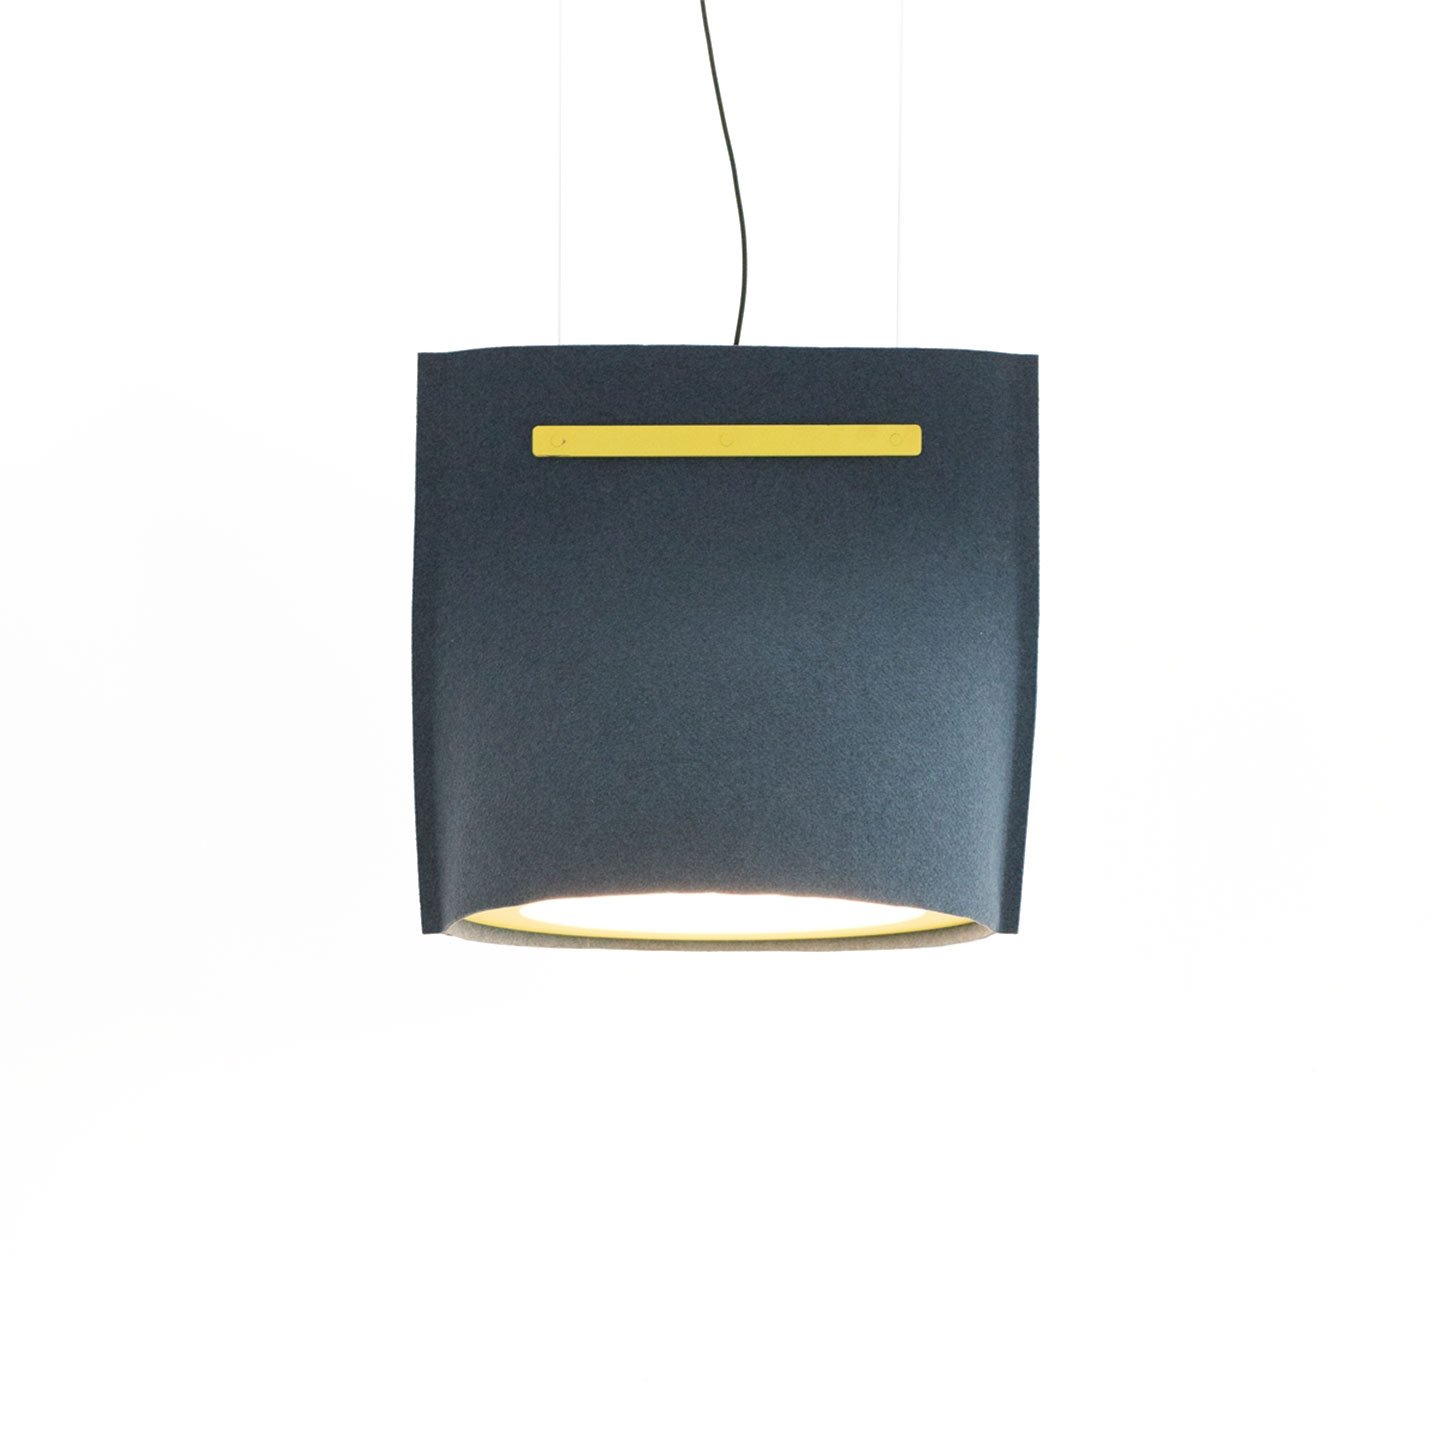 Haworth Buzzibell Lighting in felt with wire hanging down from ceiling